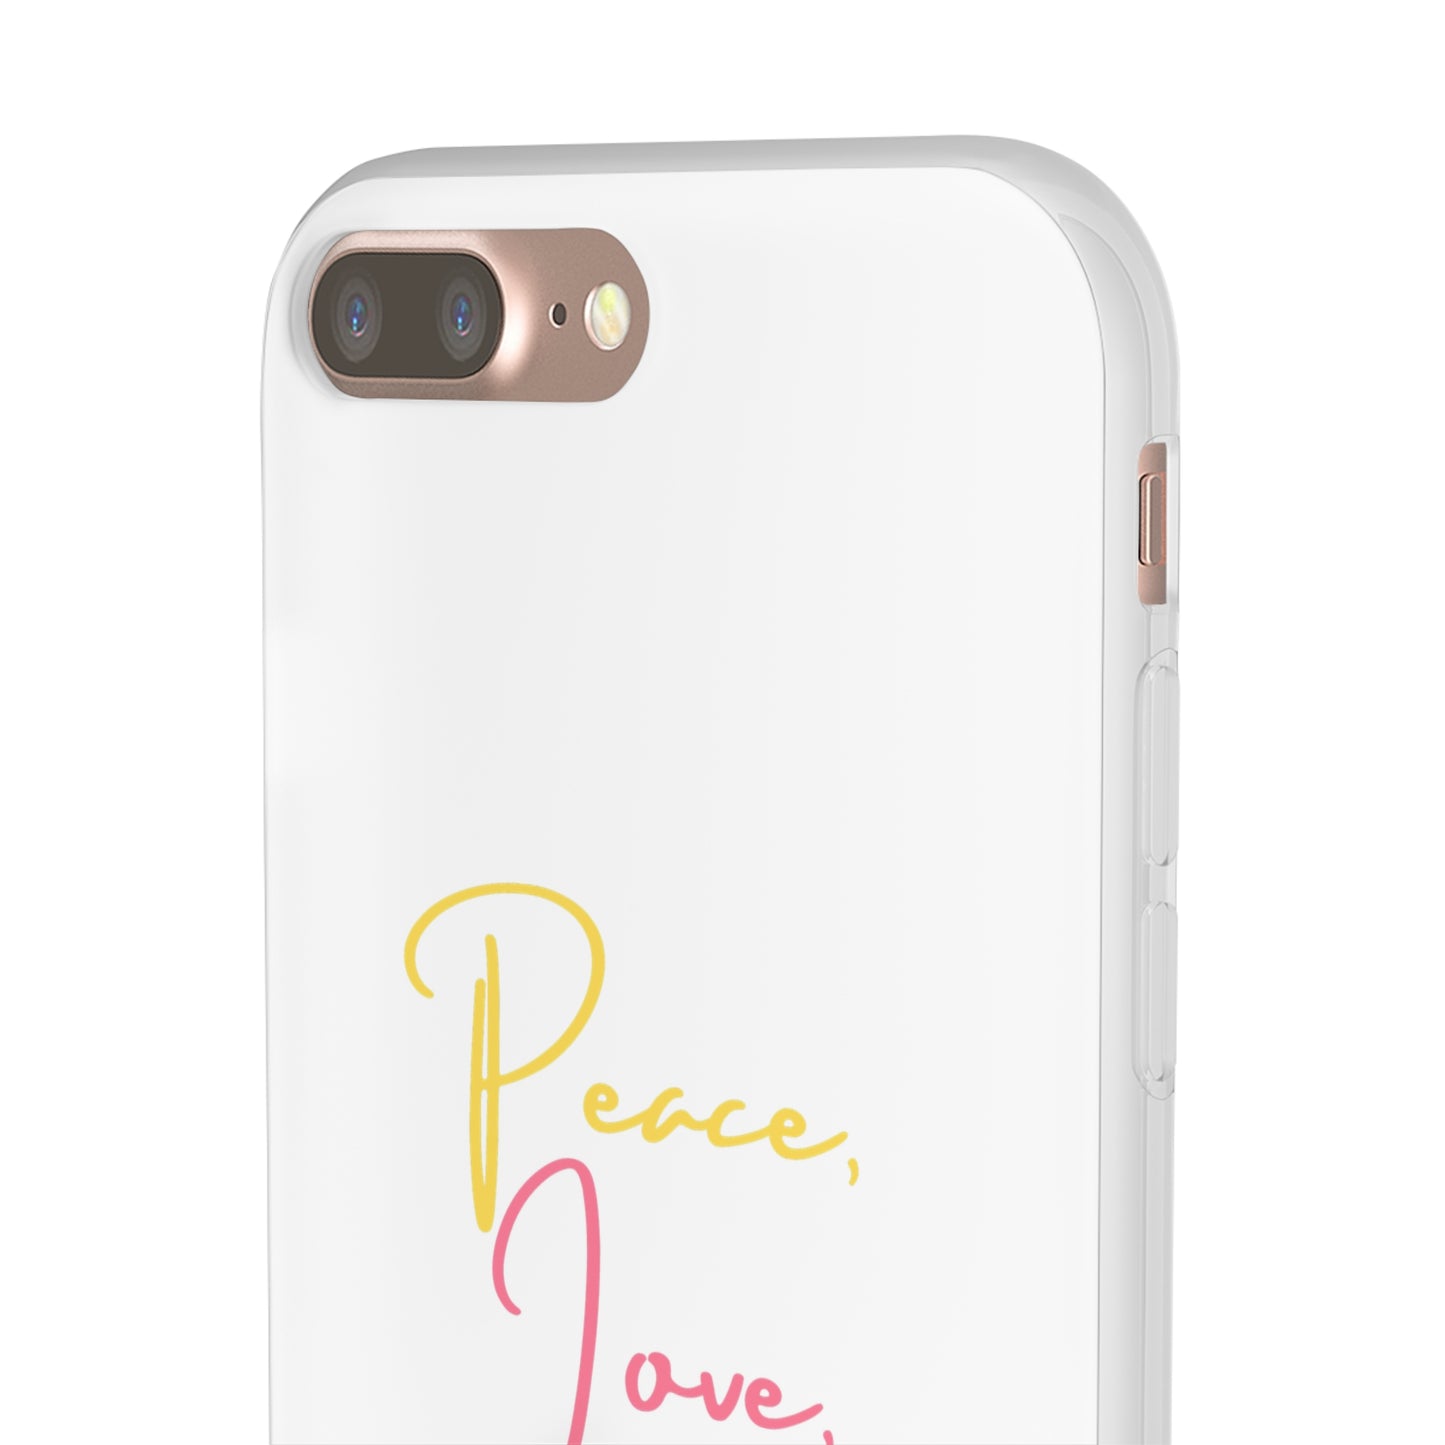 Peace, Love, & Podcasts Phone Case - Colorful Print